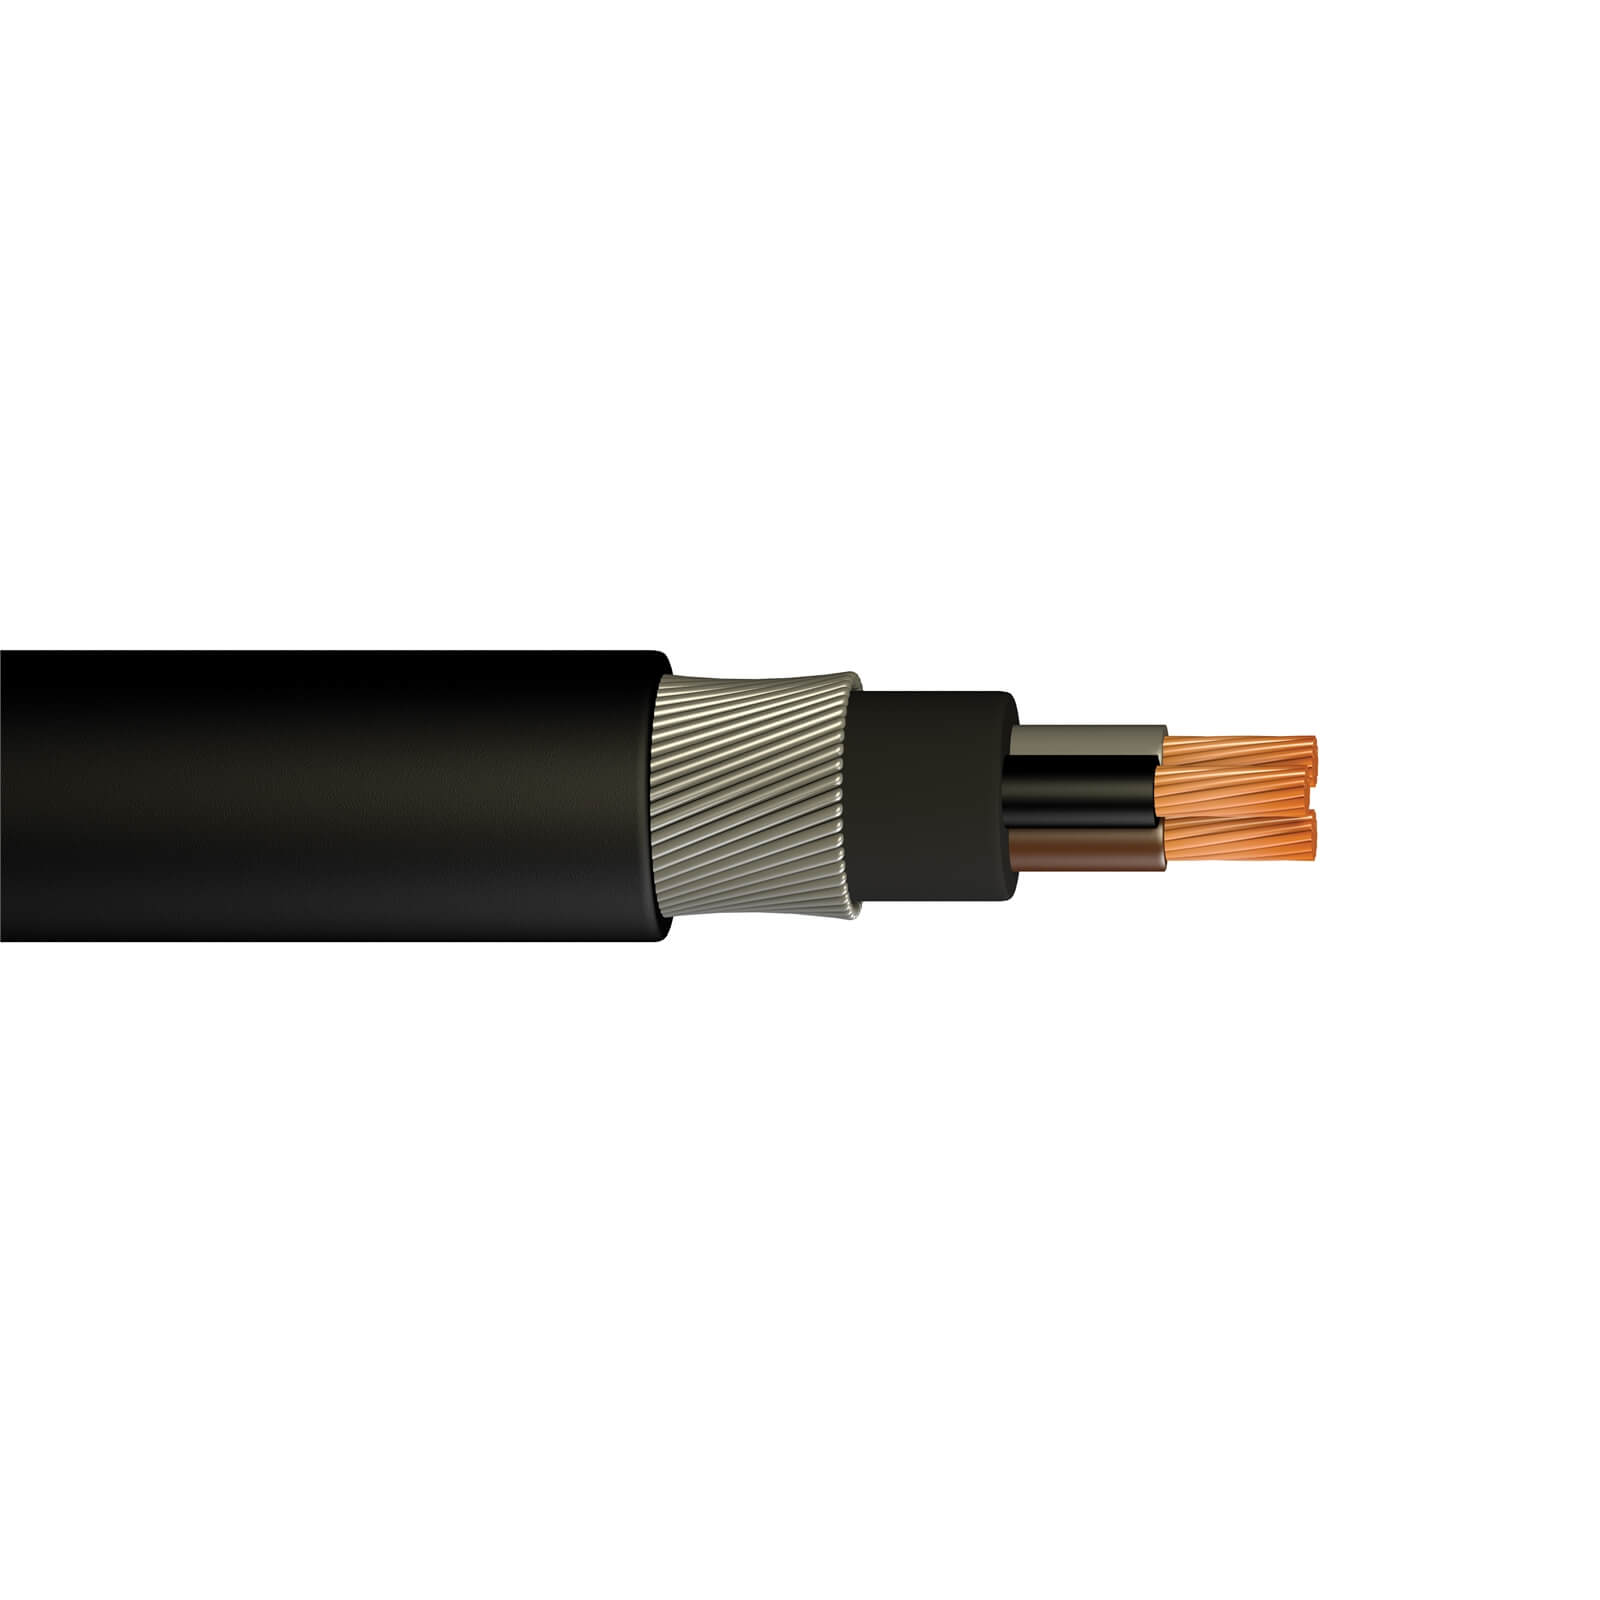 Photo of Pitacs 2.5mm 3 Core Steel Armoured Cable 25m Black 6943x